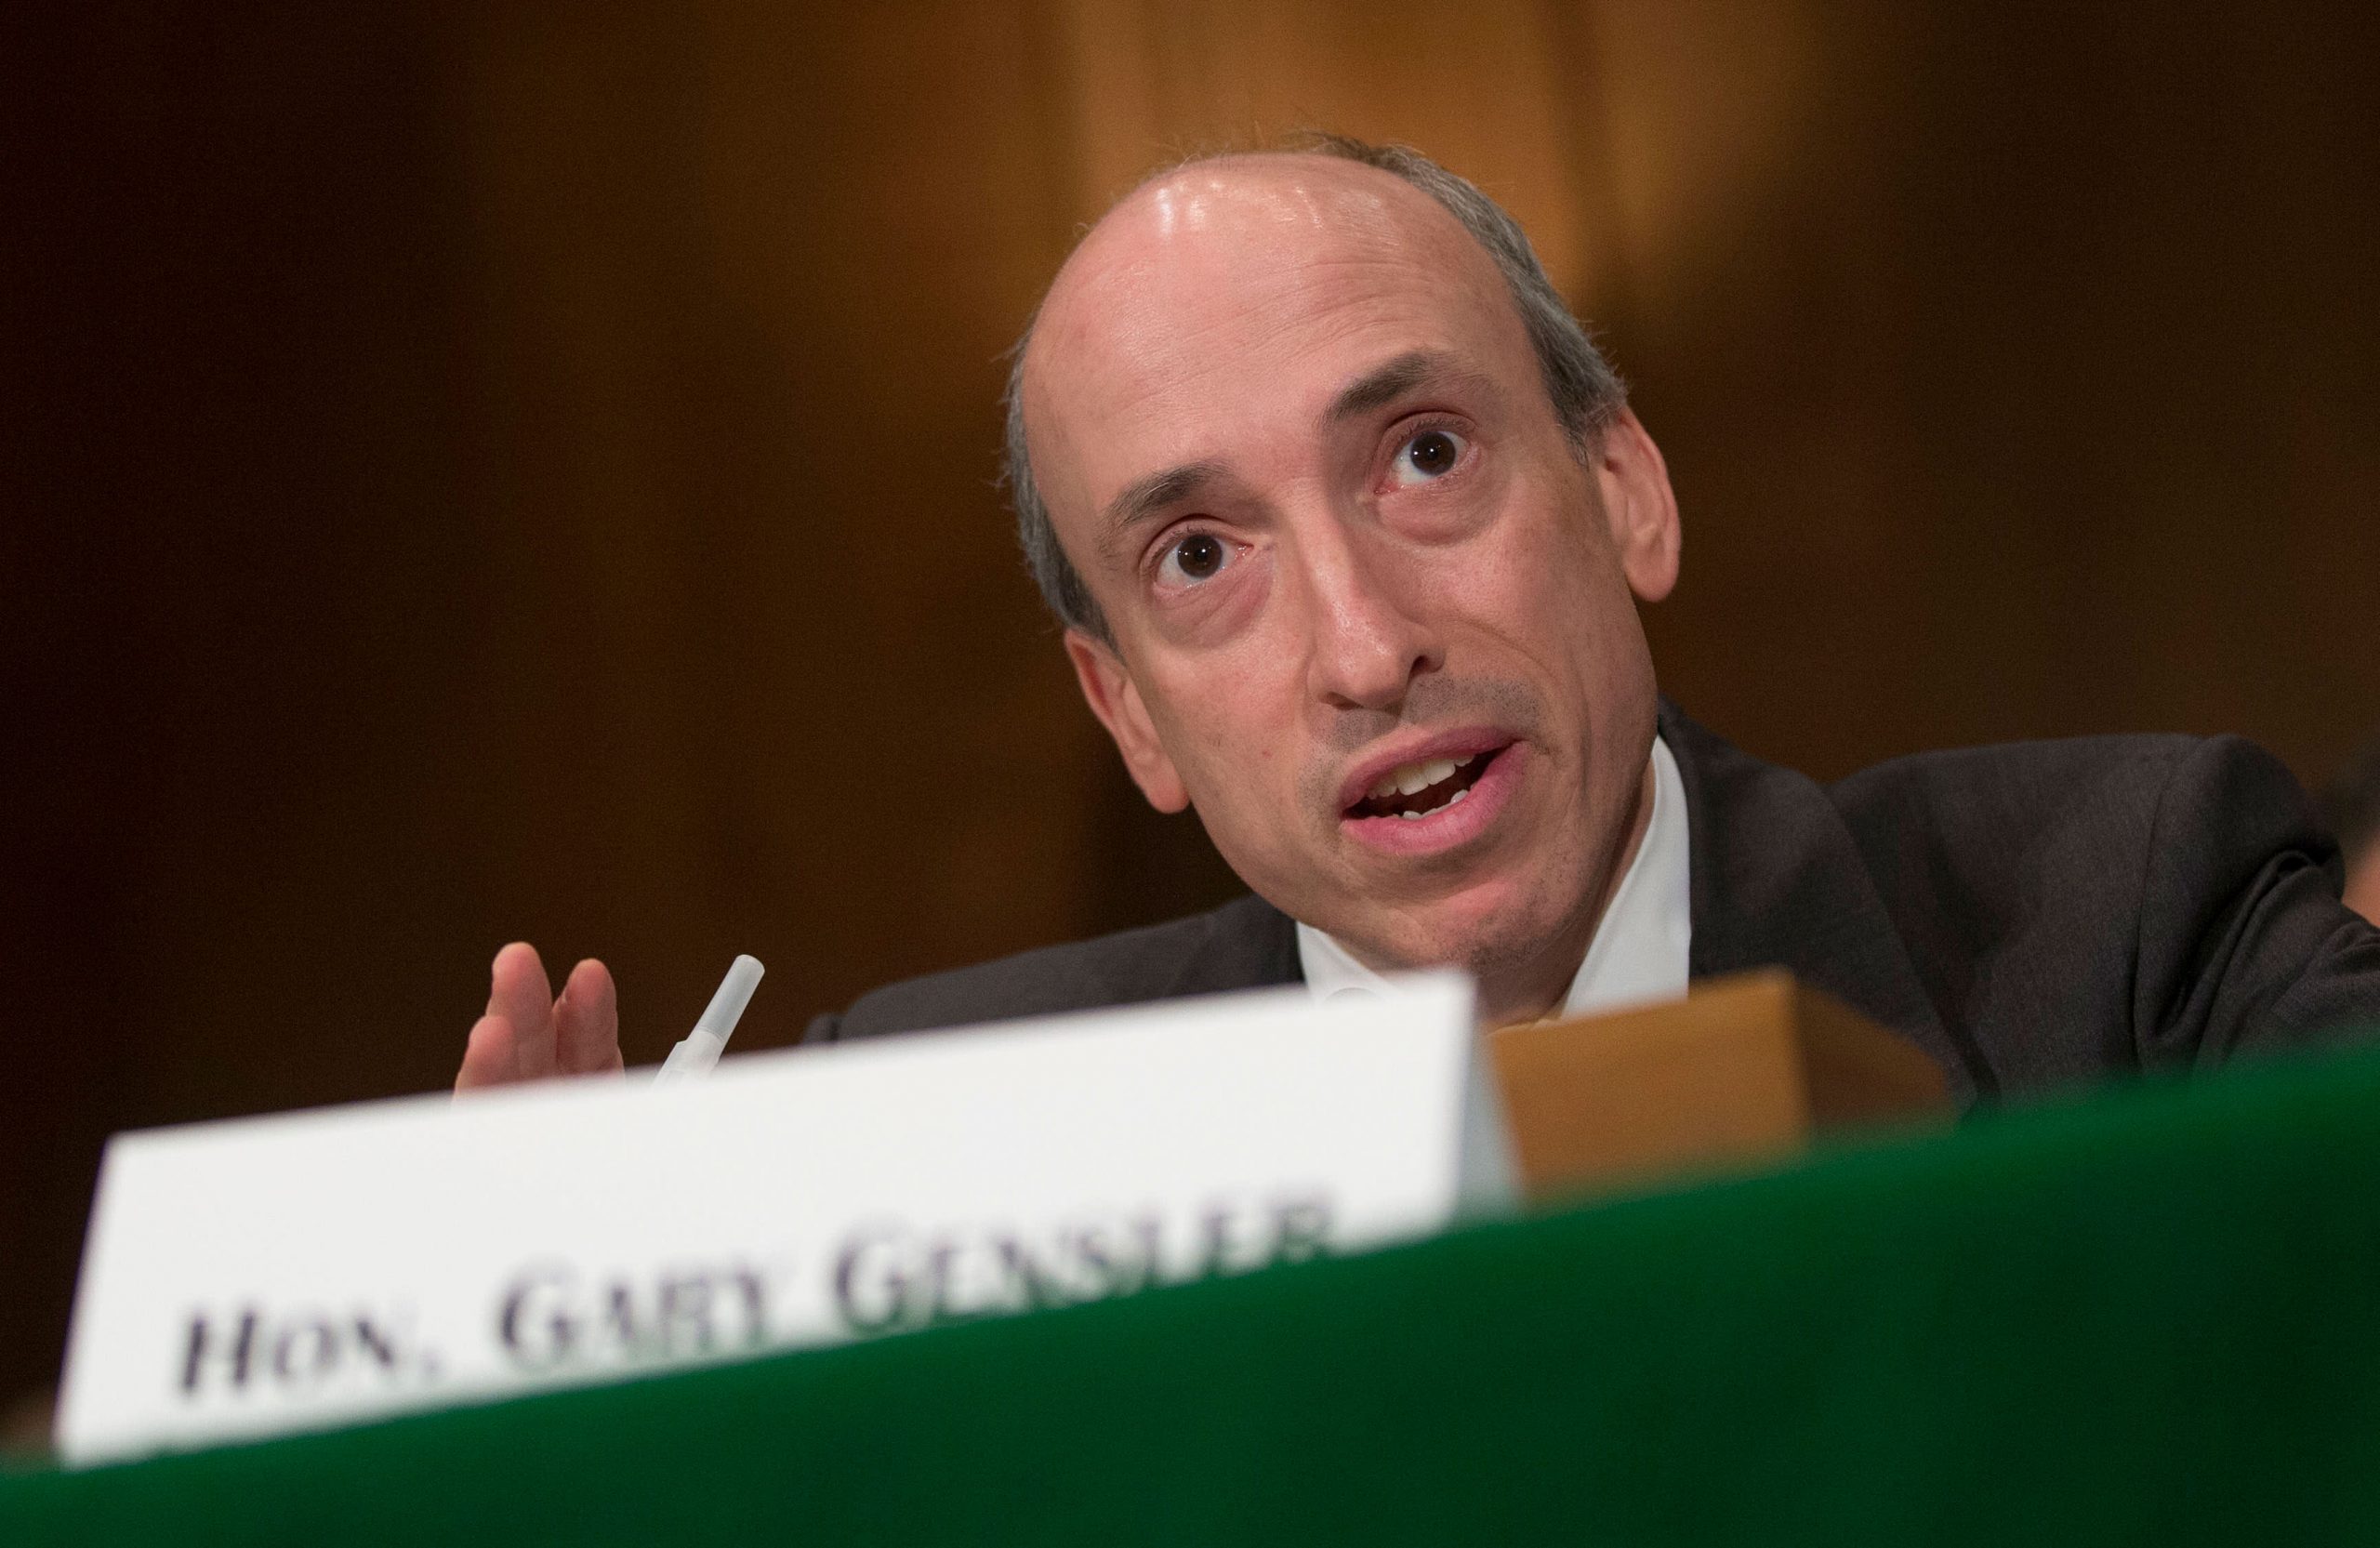 SEC Chair Gary Gensler wants more disclosure from hedge funds and private equity